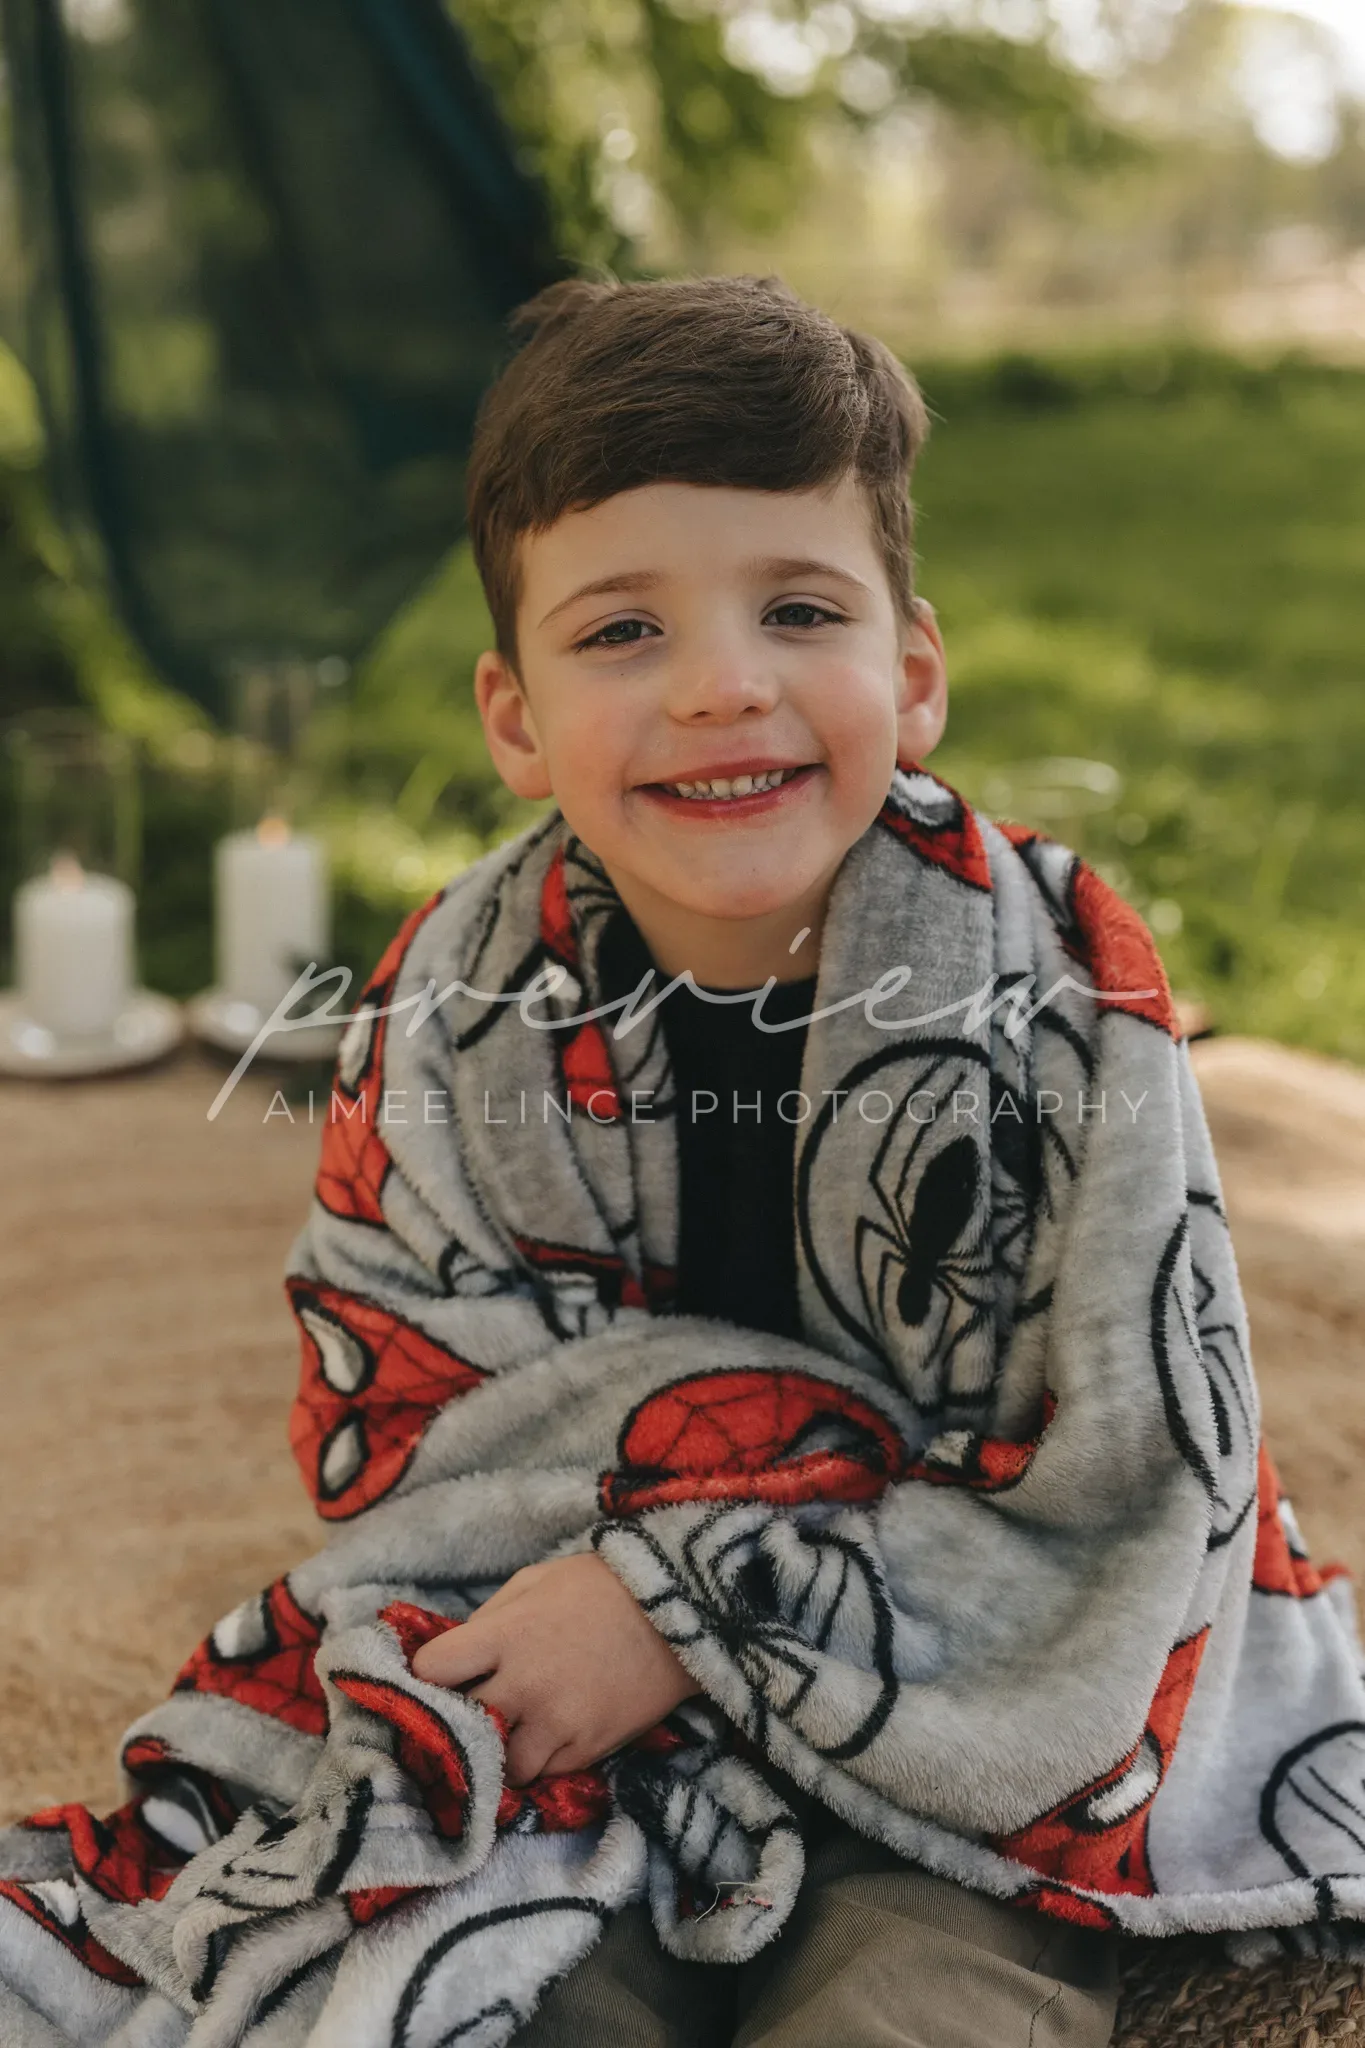 A young boy with short dark hair, smiling, wrapped in a mickey mouse blanket, sitting outdoors. the background features soft-focused trees and subtle sunlight, enhancing the tranquil setting.